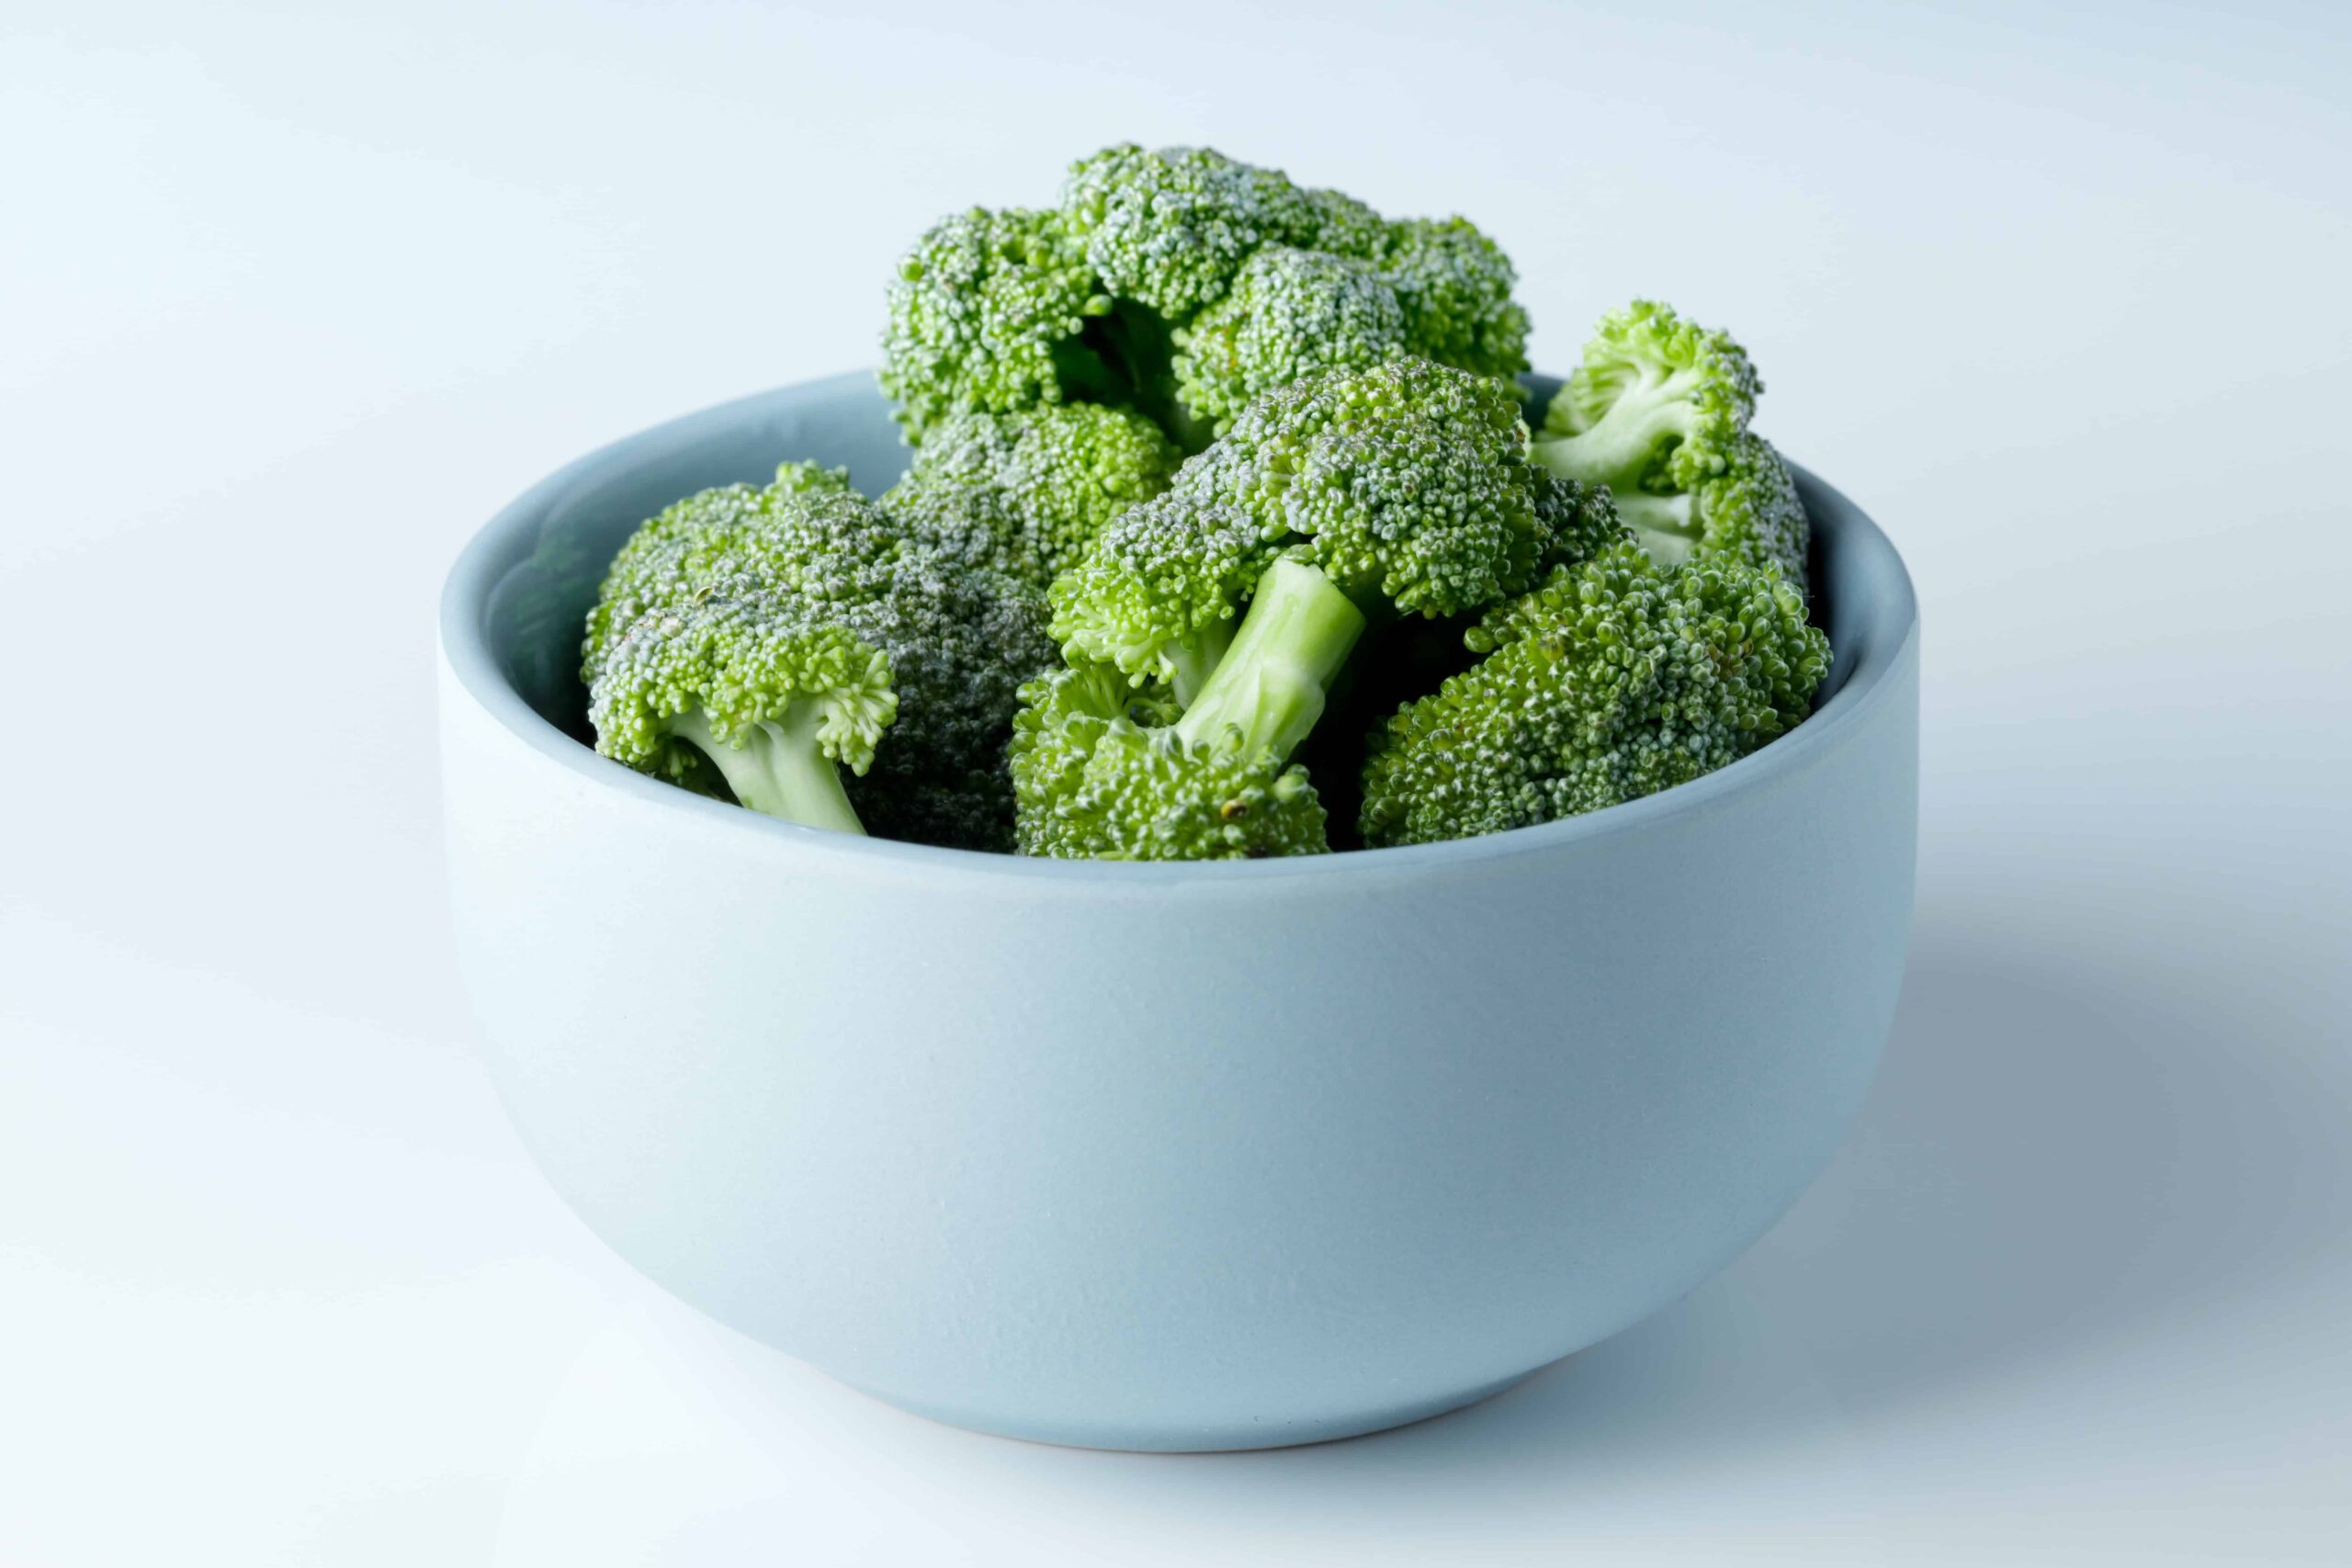 Does Broccoli Cause Bloating, Gas and Stomach Pain